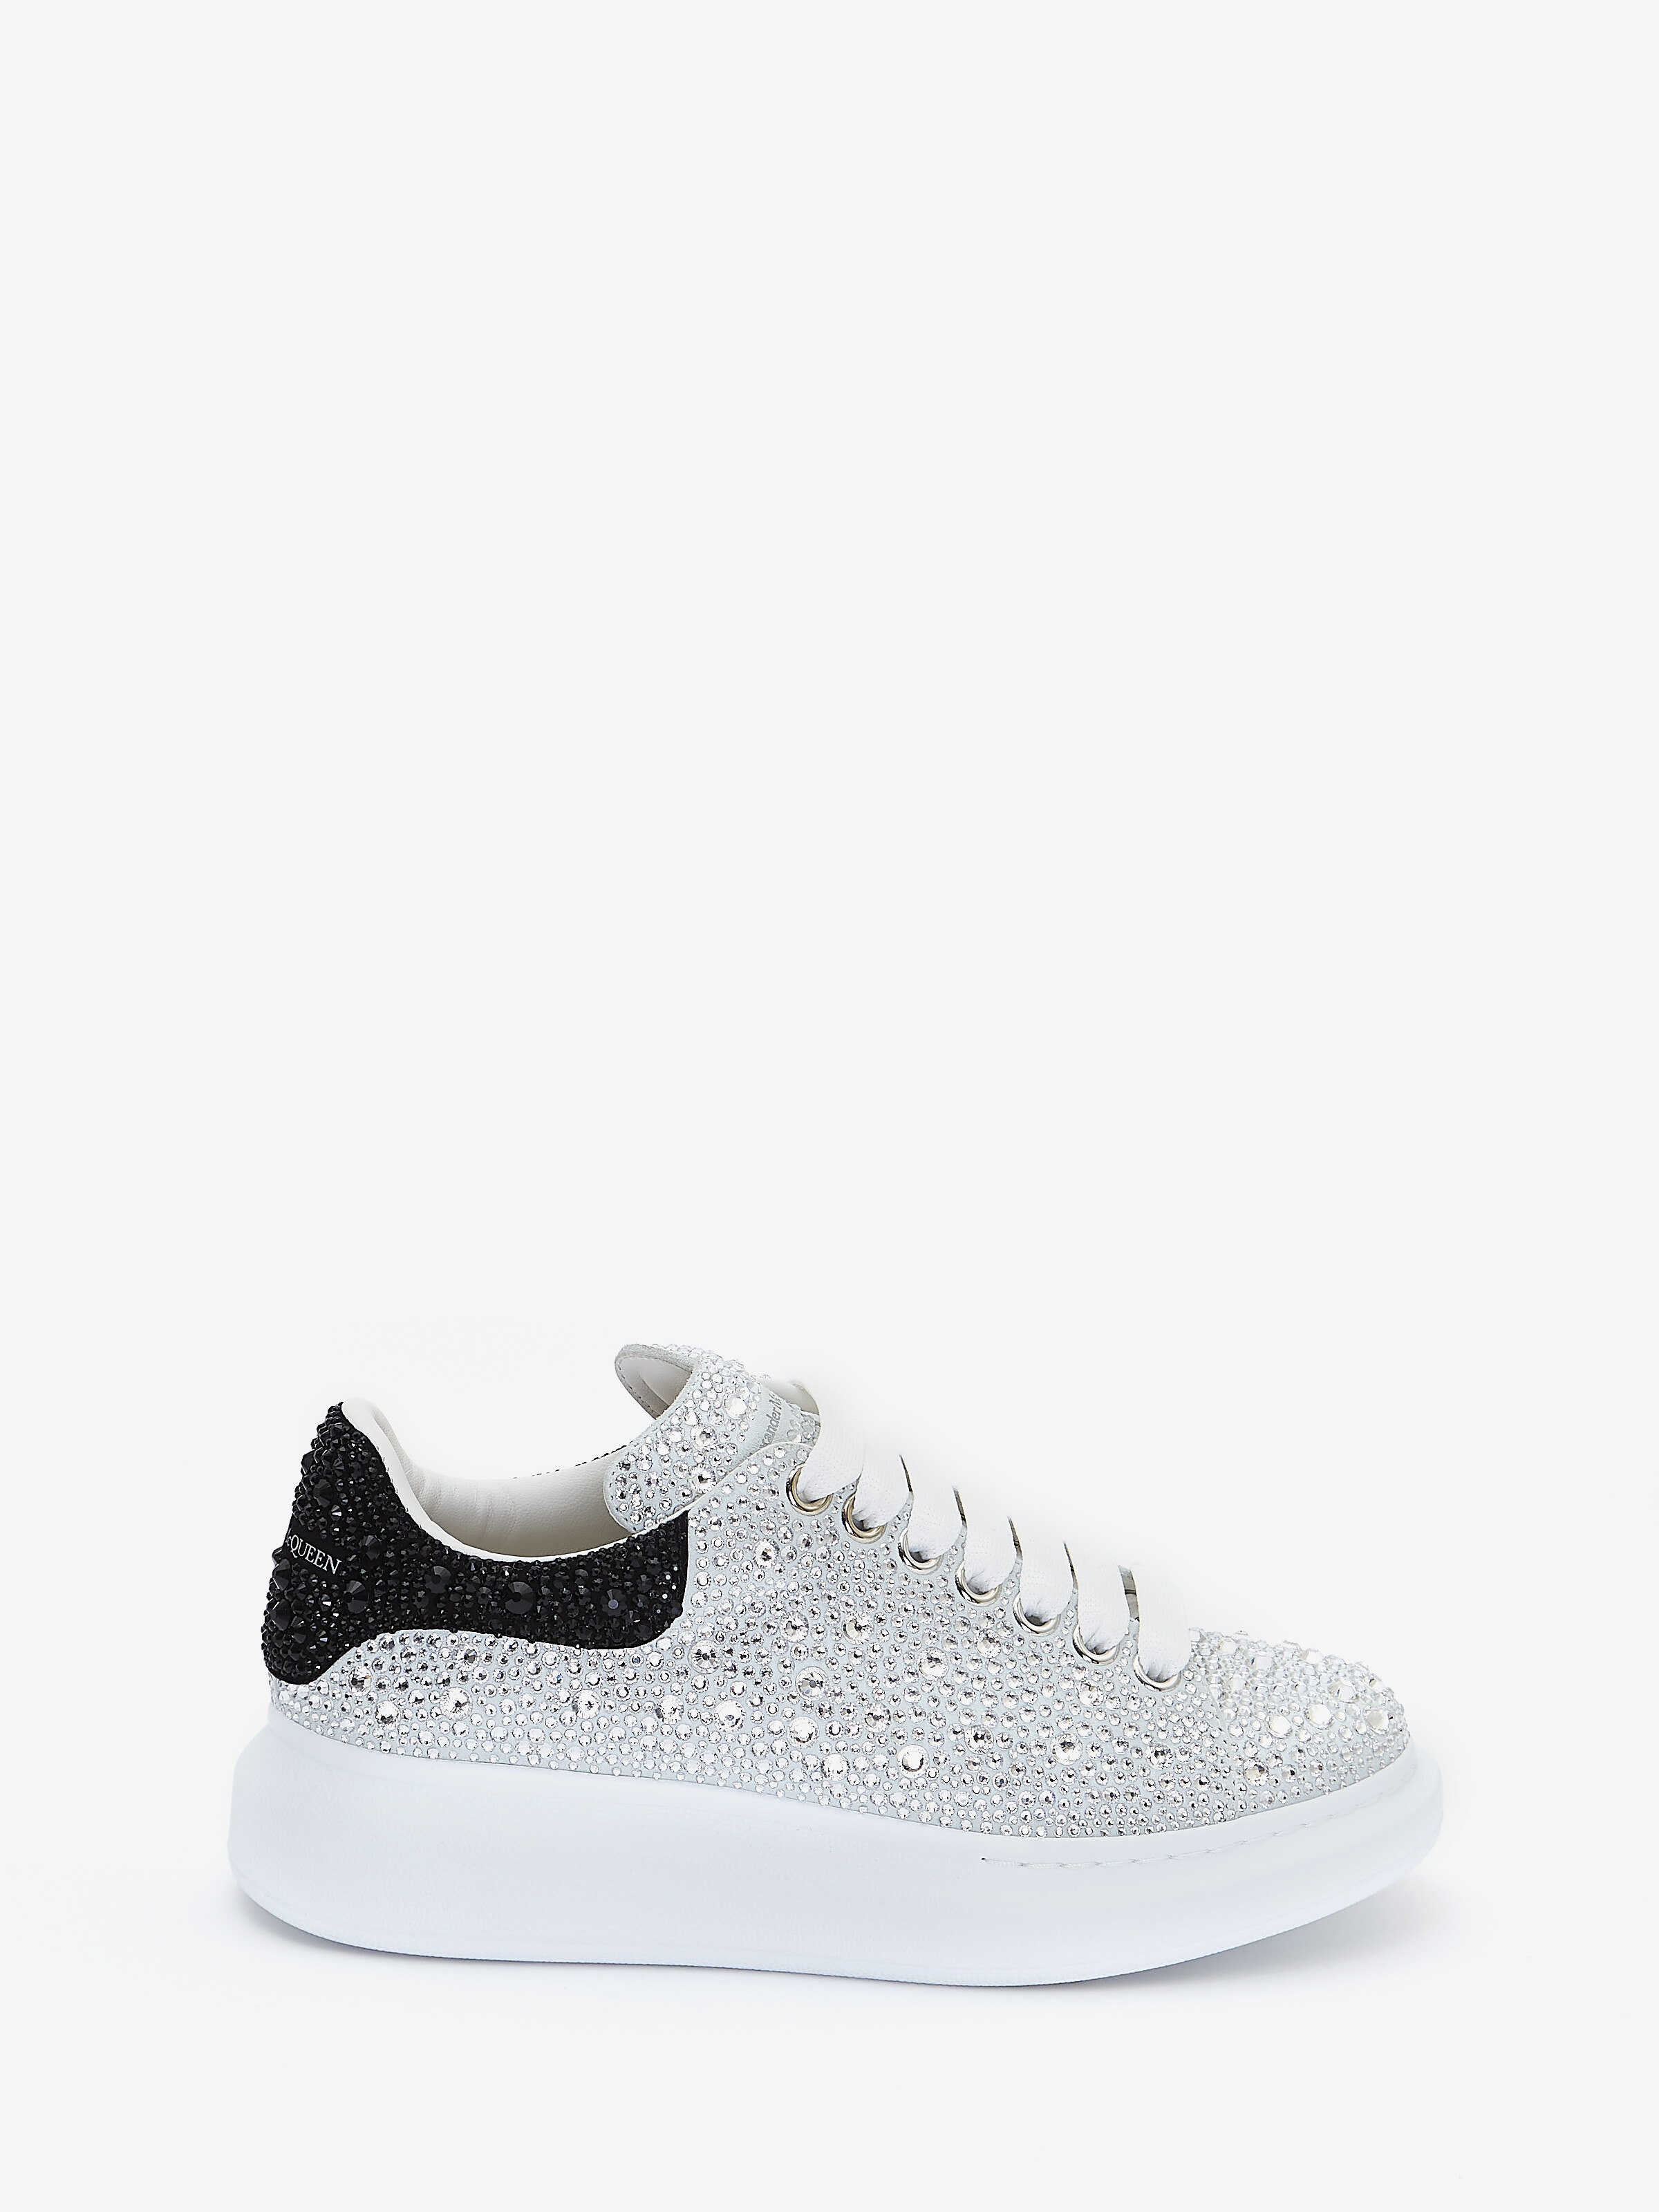 Crystal-embellished Oversized in White/Crystal | Alexander McQueen US